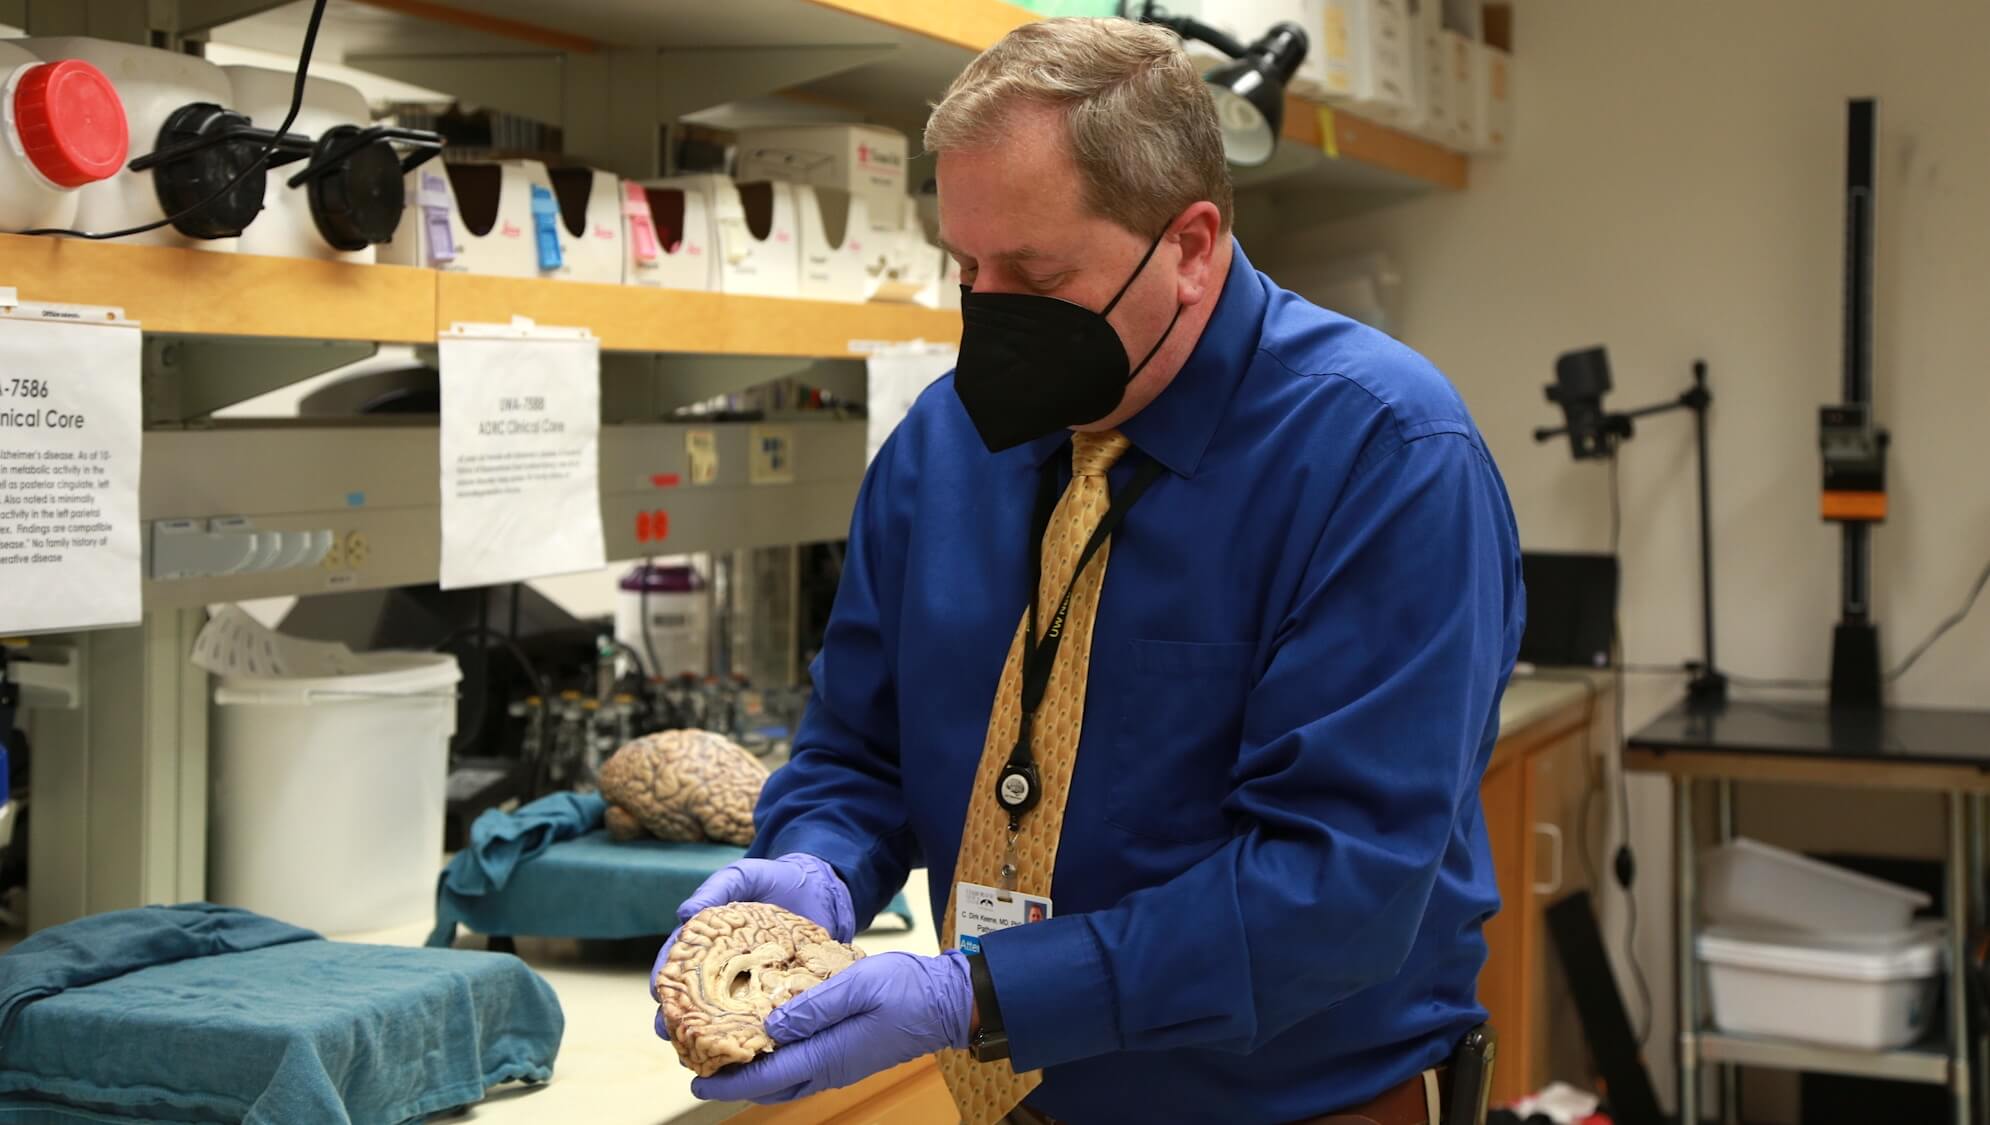 C. Dirk Keene in the lab holding a part of a human brain that was donated to science